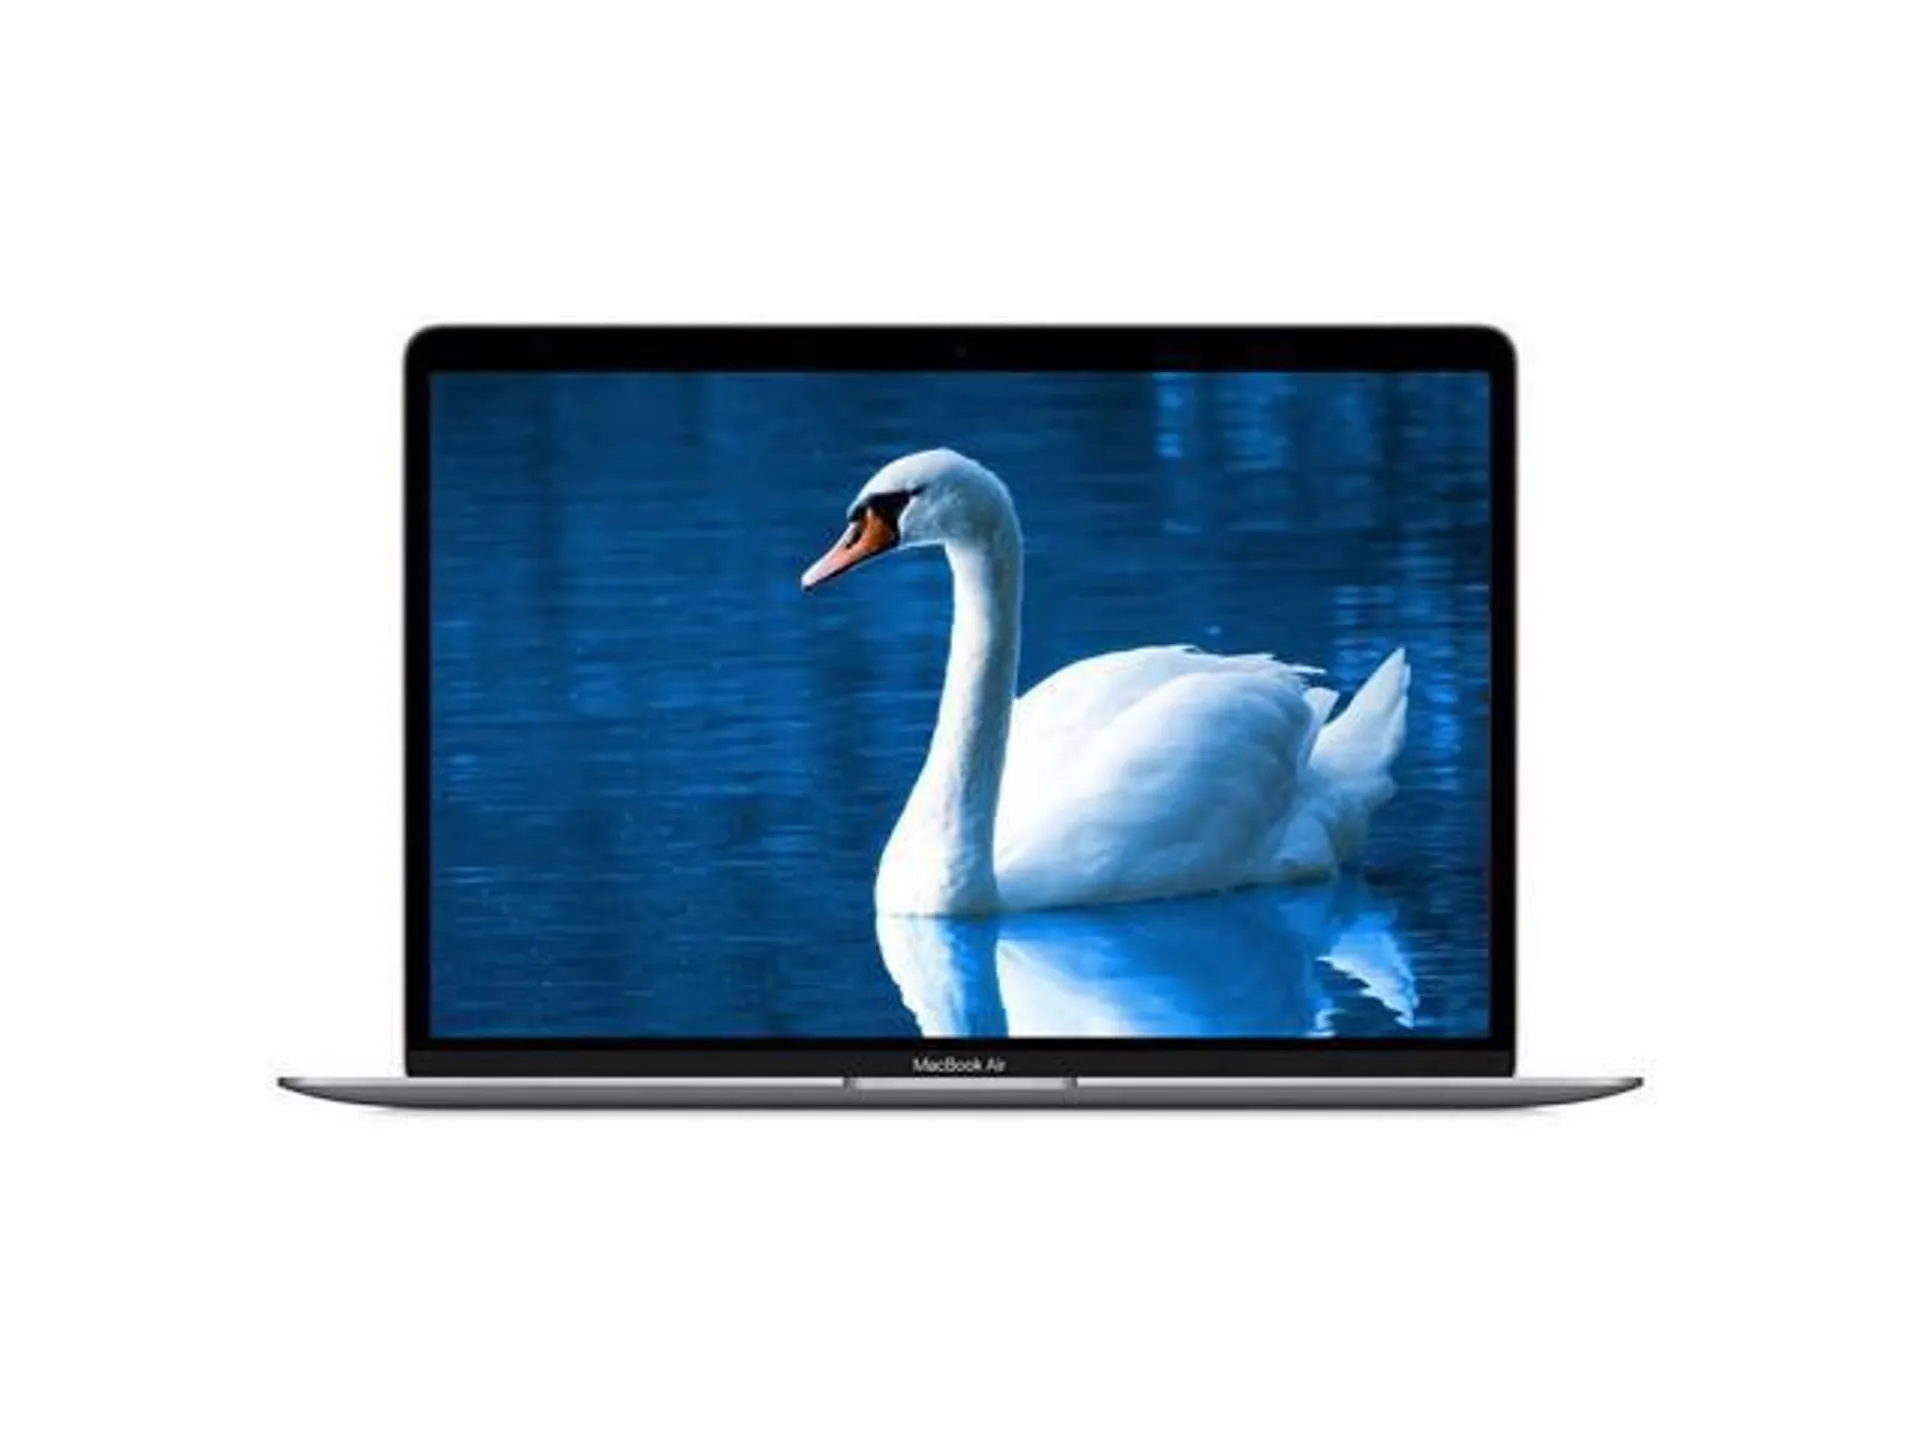 Apple A Grade Macbook Air 13.3-inch (Retina, Space Gray) 1.1Ghz Dual Core i3 (2020) MWTJ2LL/A 512GB SSD 8GB Memory 2560x1600 Display Mac OS/Win 10 Air Power Adapter Included